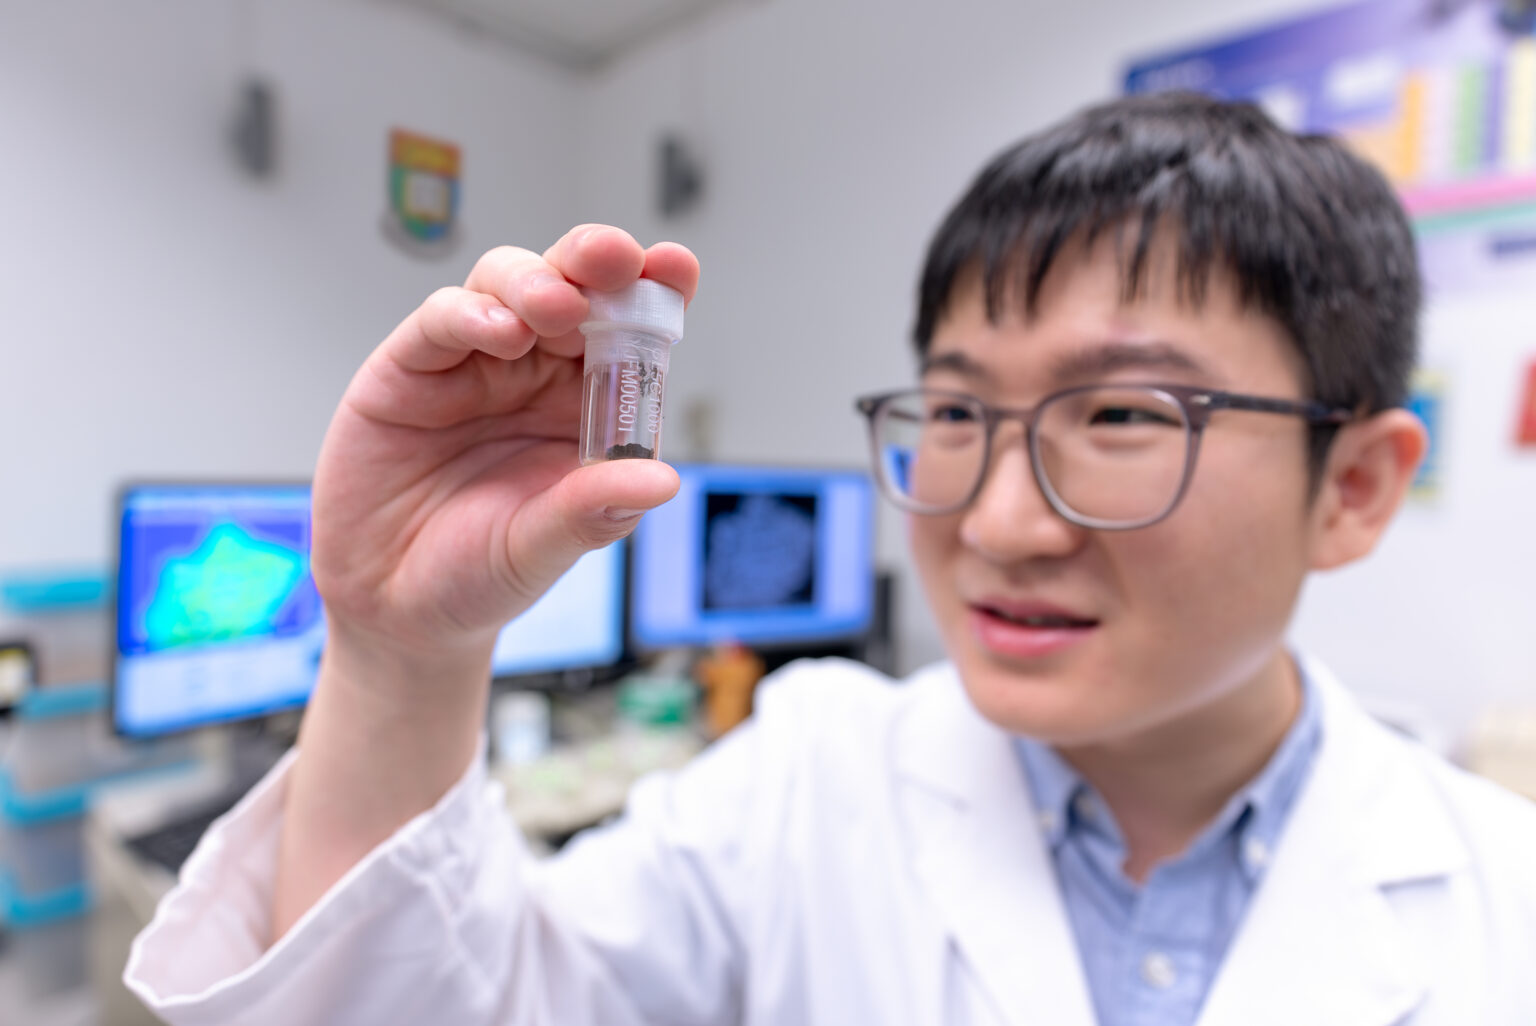 Dr Yuqi Qian from the University of Hong Kong holds up a container with lunar soil samples. The doctor is wearing a white lab coat with a blue shirt underneath. He is in a research lab with computers in the background.